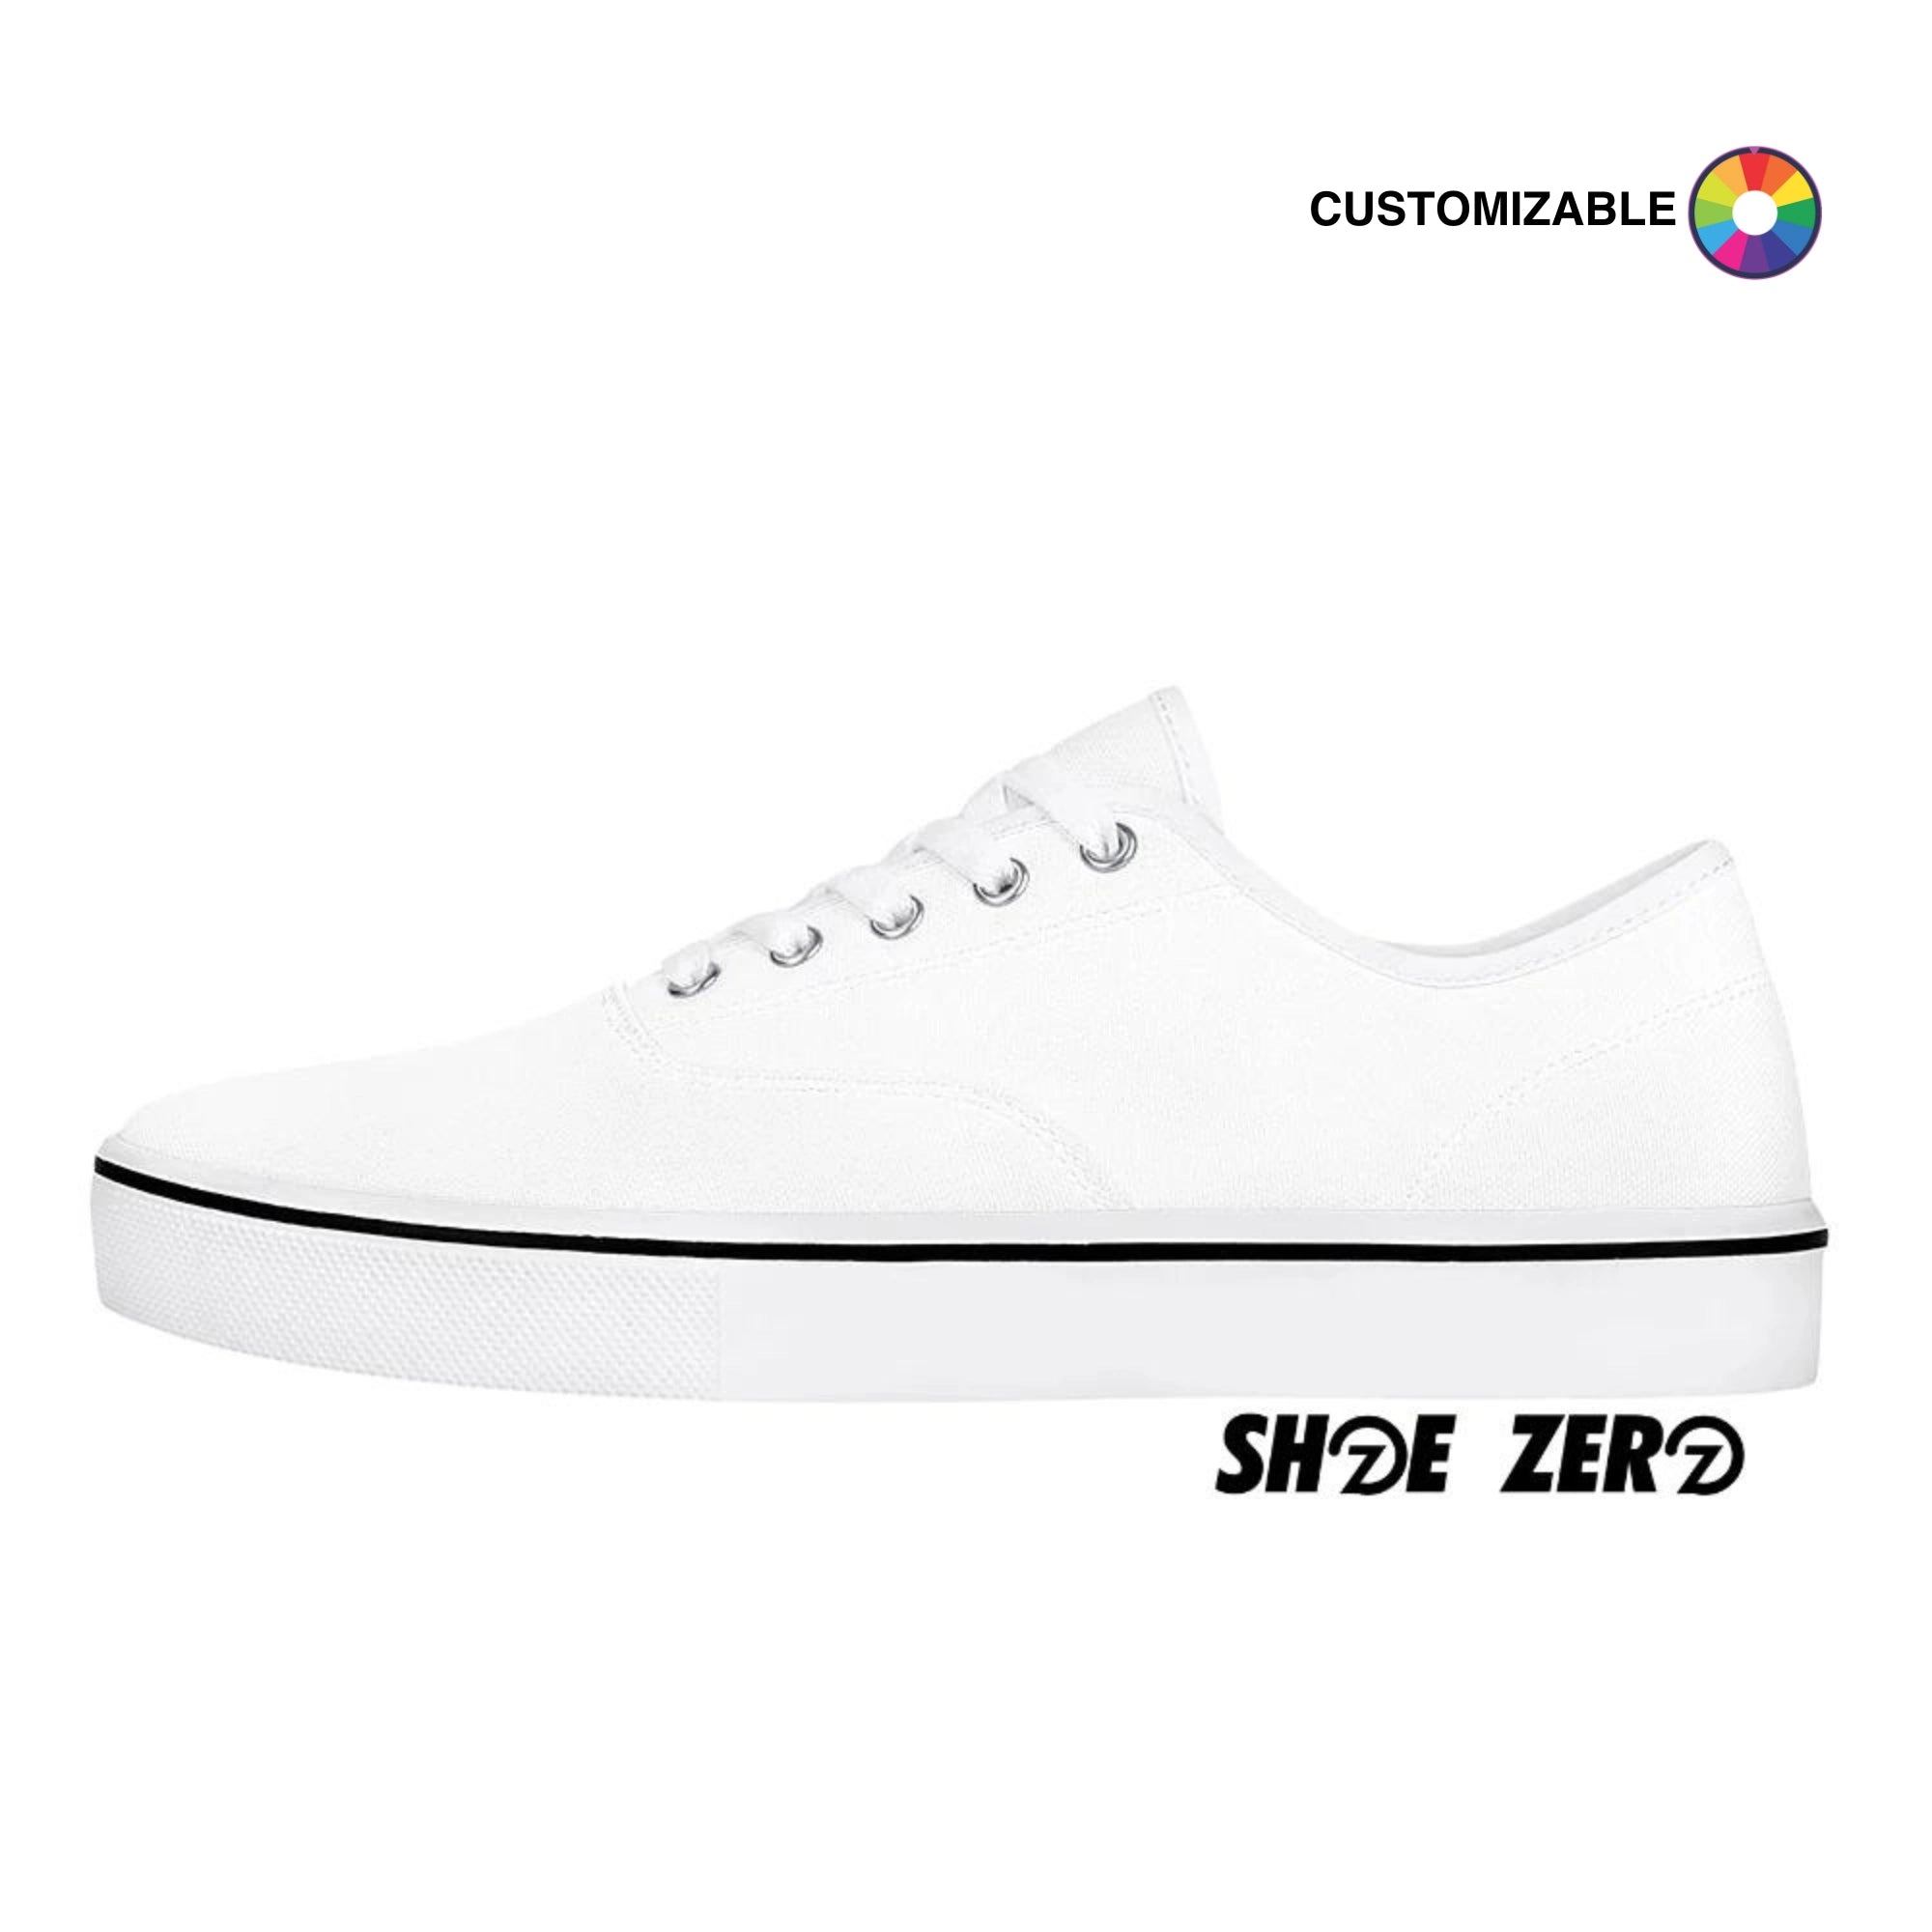 Customizable Classic Skate Shoes